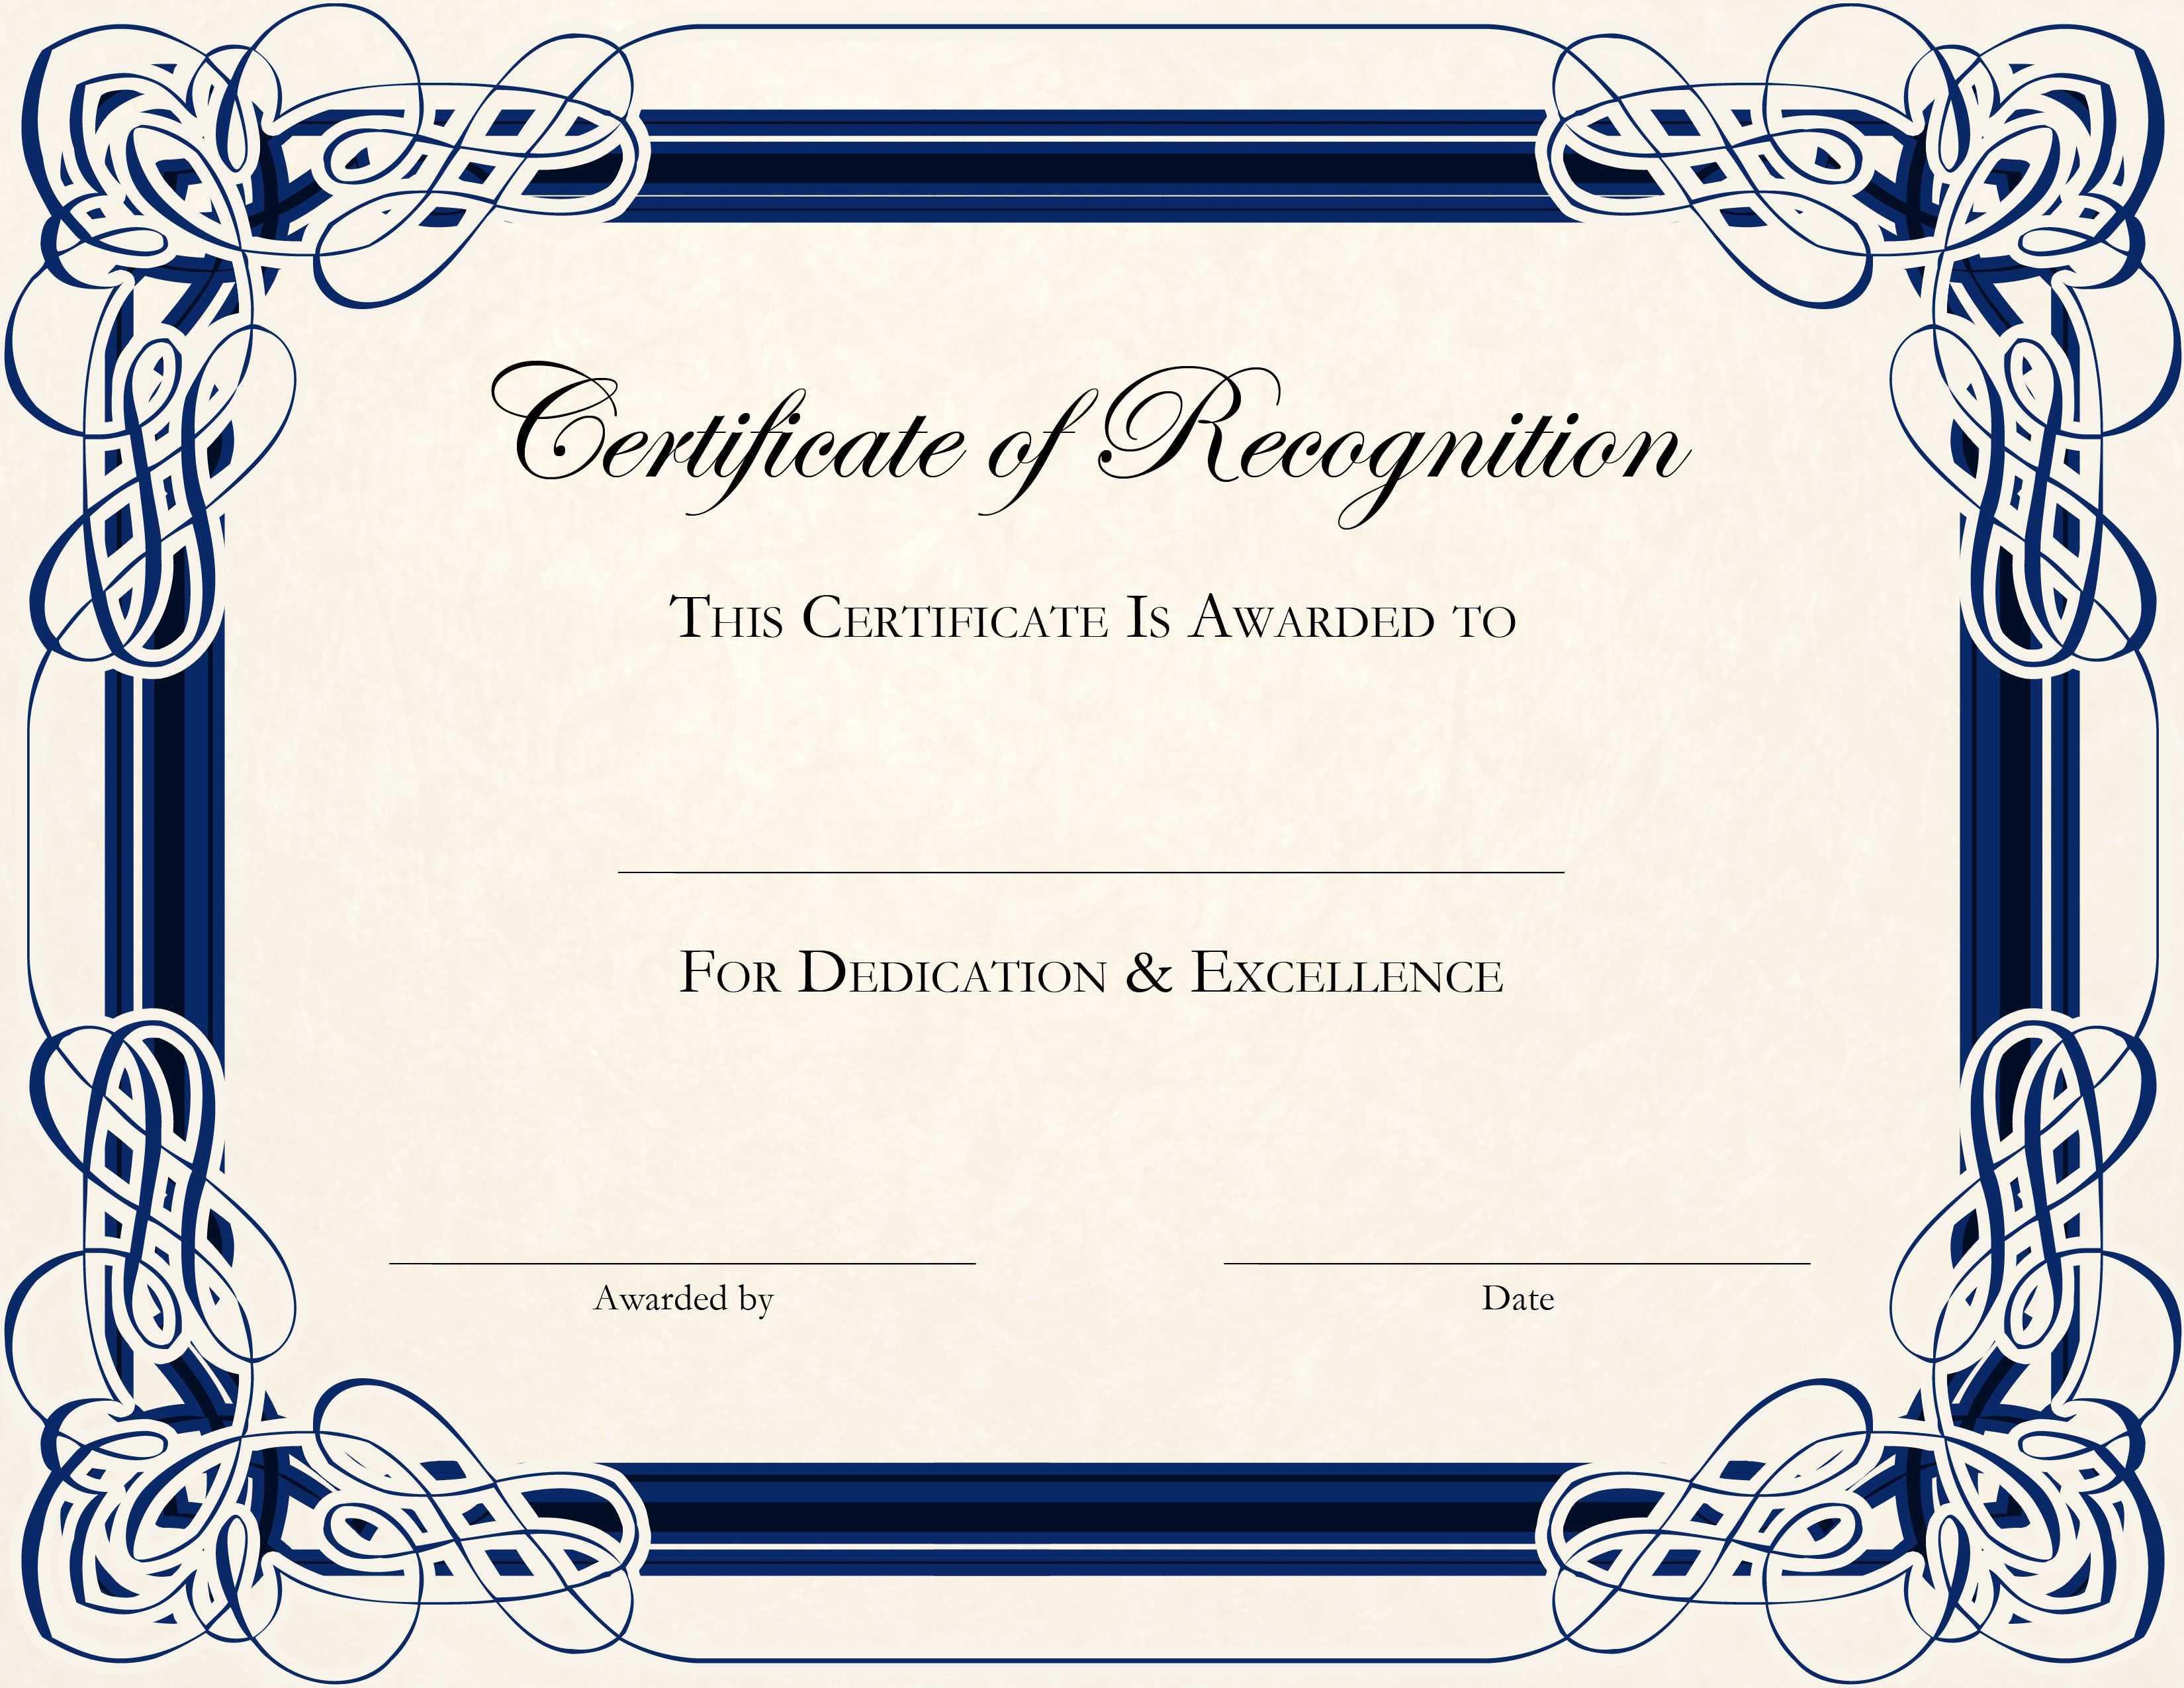 Certificate Template Designs Recognition Docs | Blankets With Regard To Certificate Of Recognition Word Template